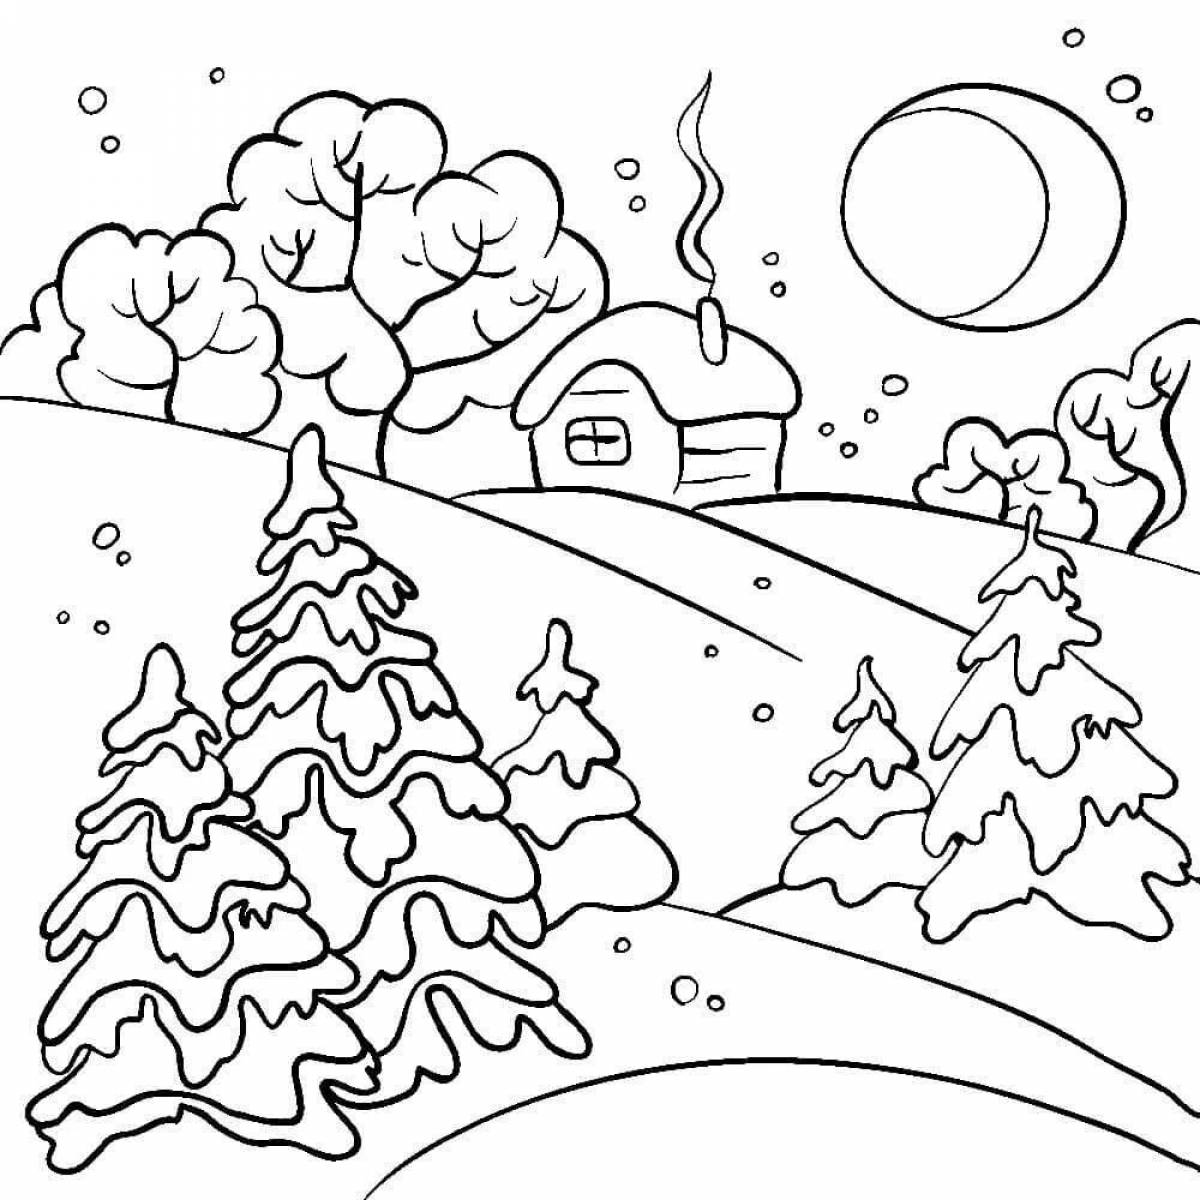 Drawing on winter theme #8